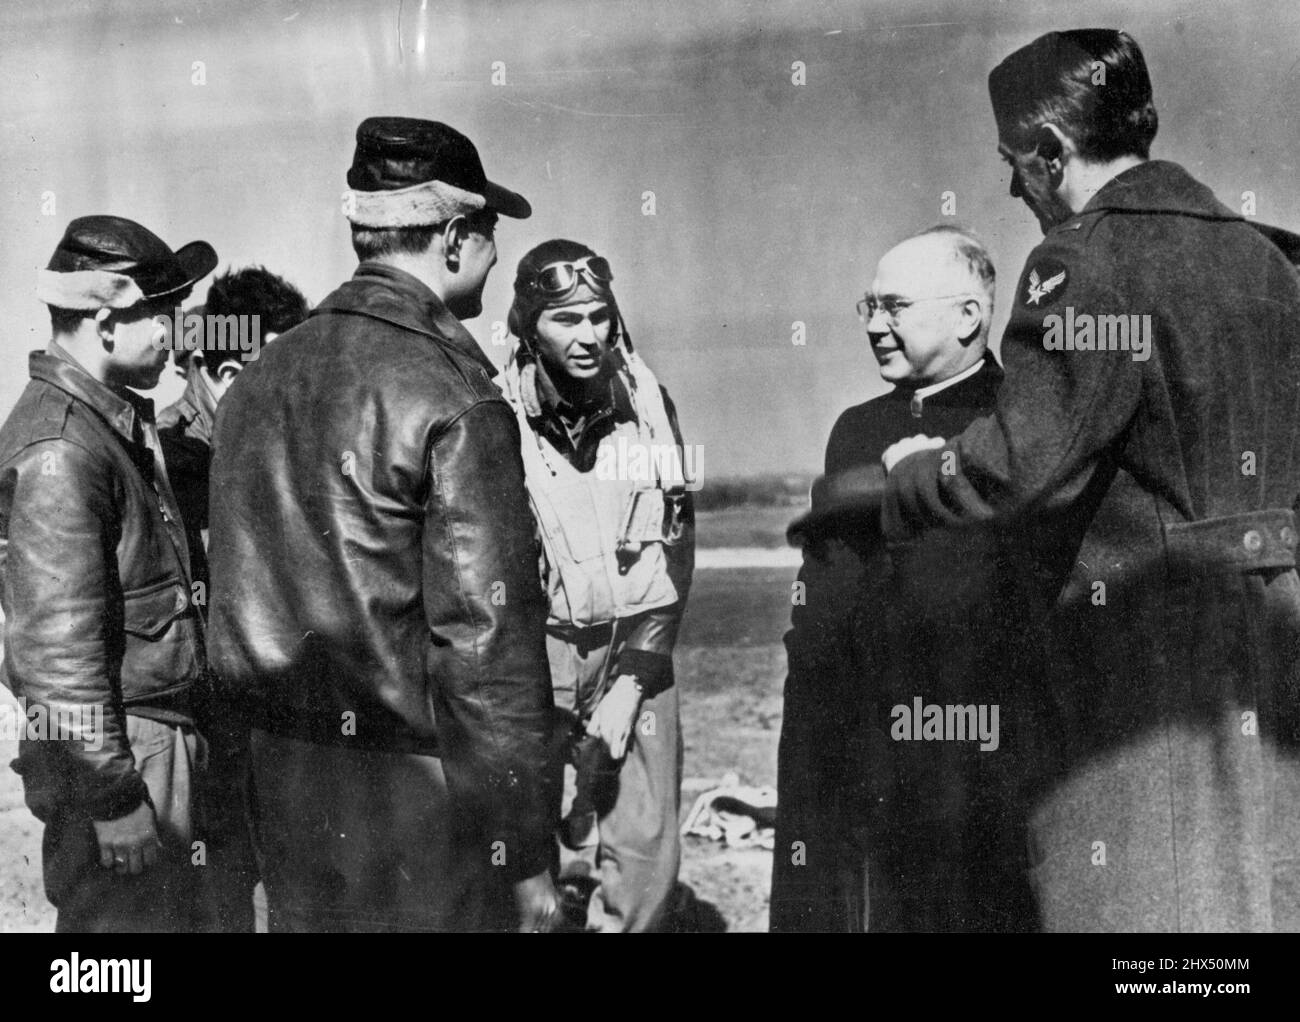 Archbishop Spellman And Antwerp Air Crews - Archbishop Francis J. Spellman, Military Vicar of the U.S. Armed Forces, talks to Captain Oscar O'Neill, of Rio de Janeiro, and members of the Flying Fortress 'Invasion II' before the take-off, for Antwerp, where on Monday April 5th, the U.S.A.A. F. dropped bombs on the German Armament works. July 02, 1943. (Photo by U.S. Official). Stock Photo